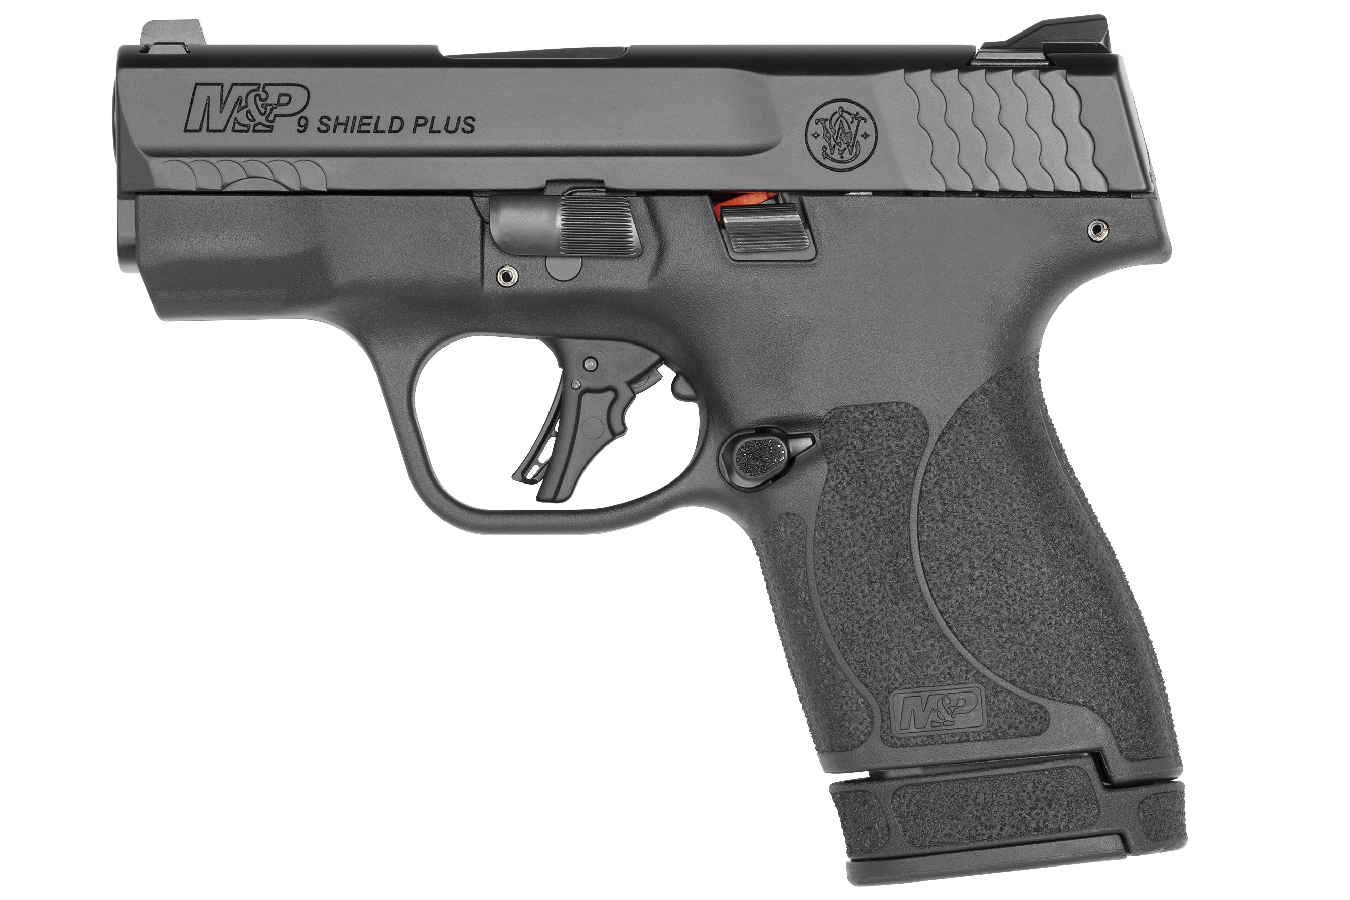 SMITH AND WESSON MP9 SHIELD PLUS 9MM MICRO COMPACT PISTOL WITH NO THUMB SAFETY